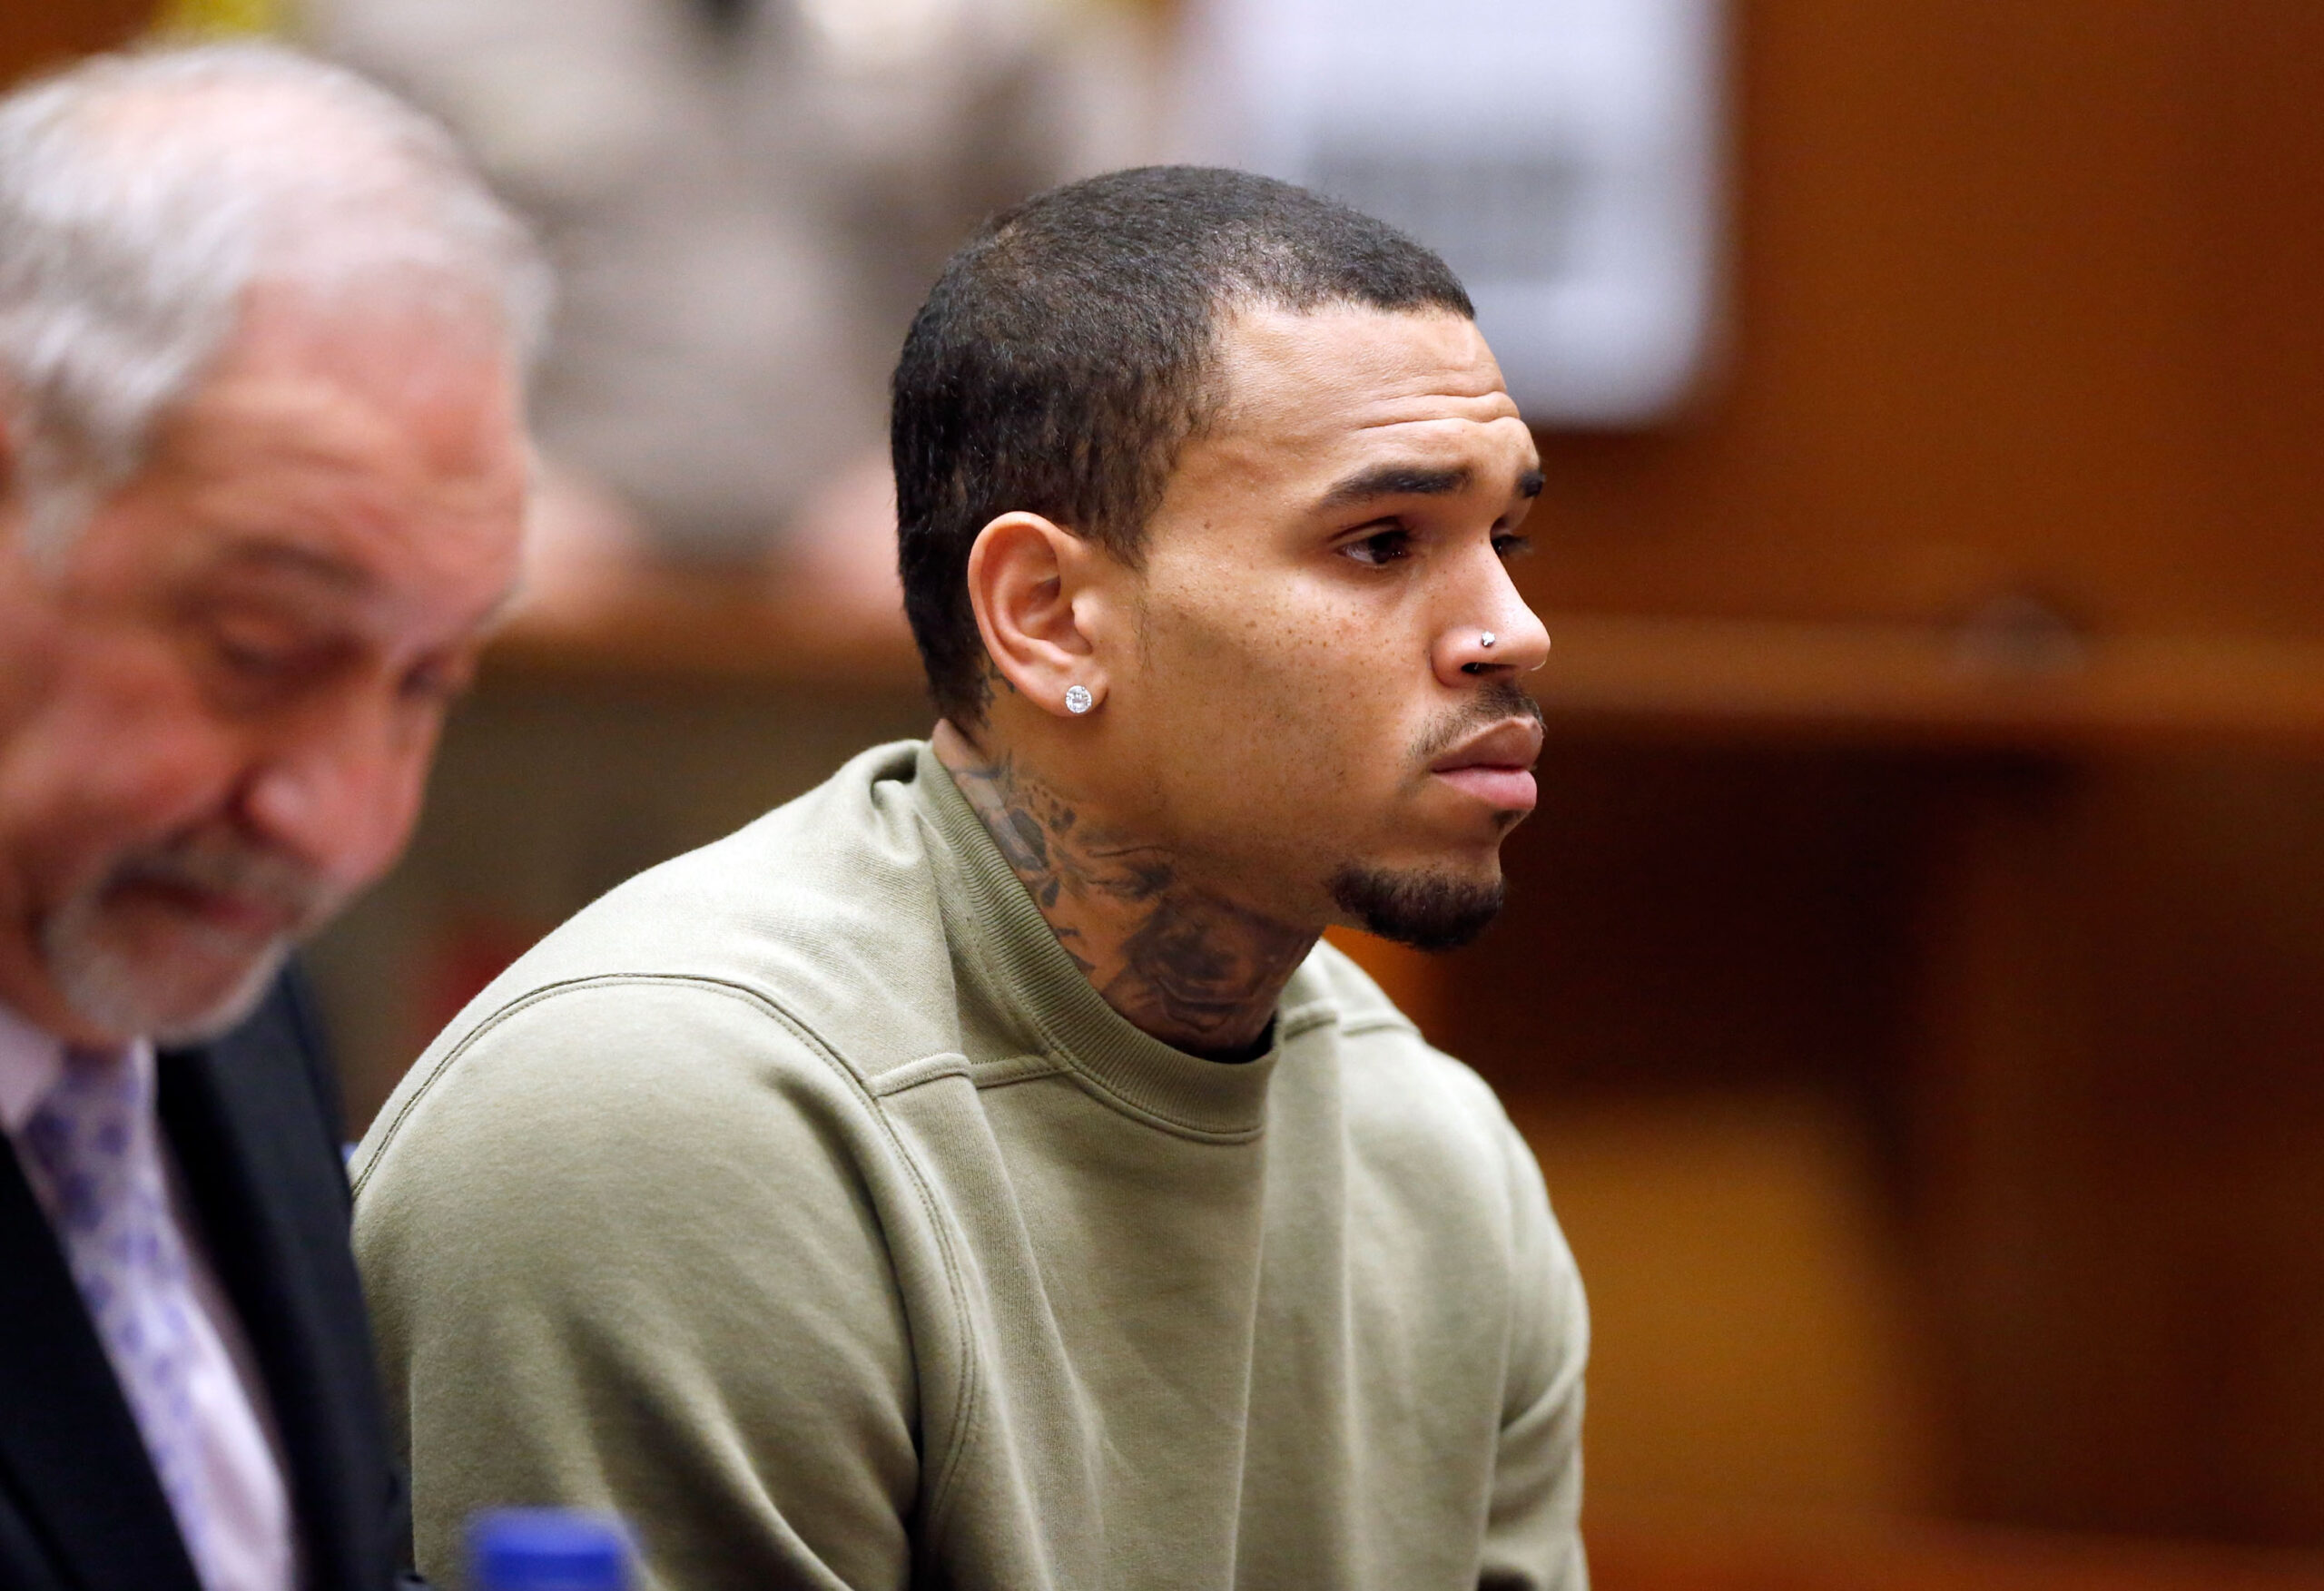 Chris Brown Must Pay Backup Dancer $15K For Eye Injuries Sustained On Music Video Set